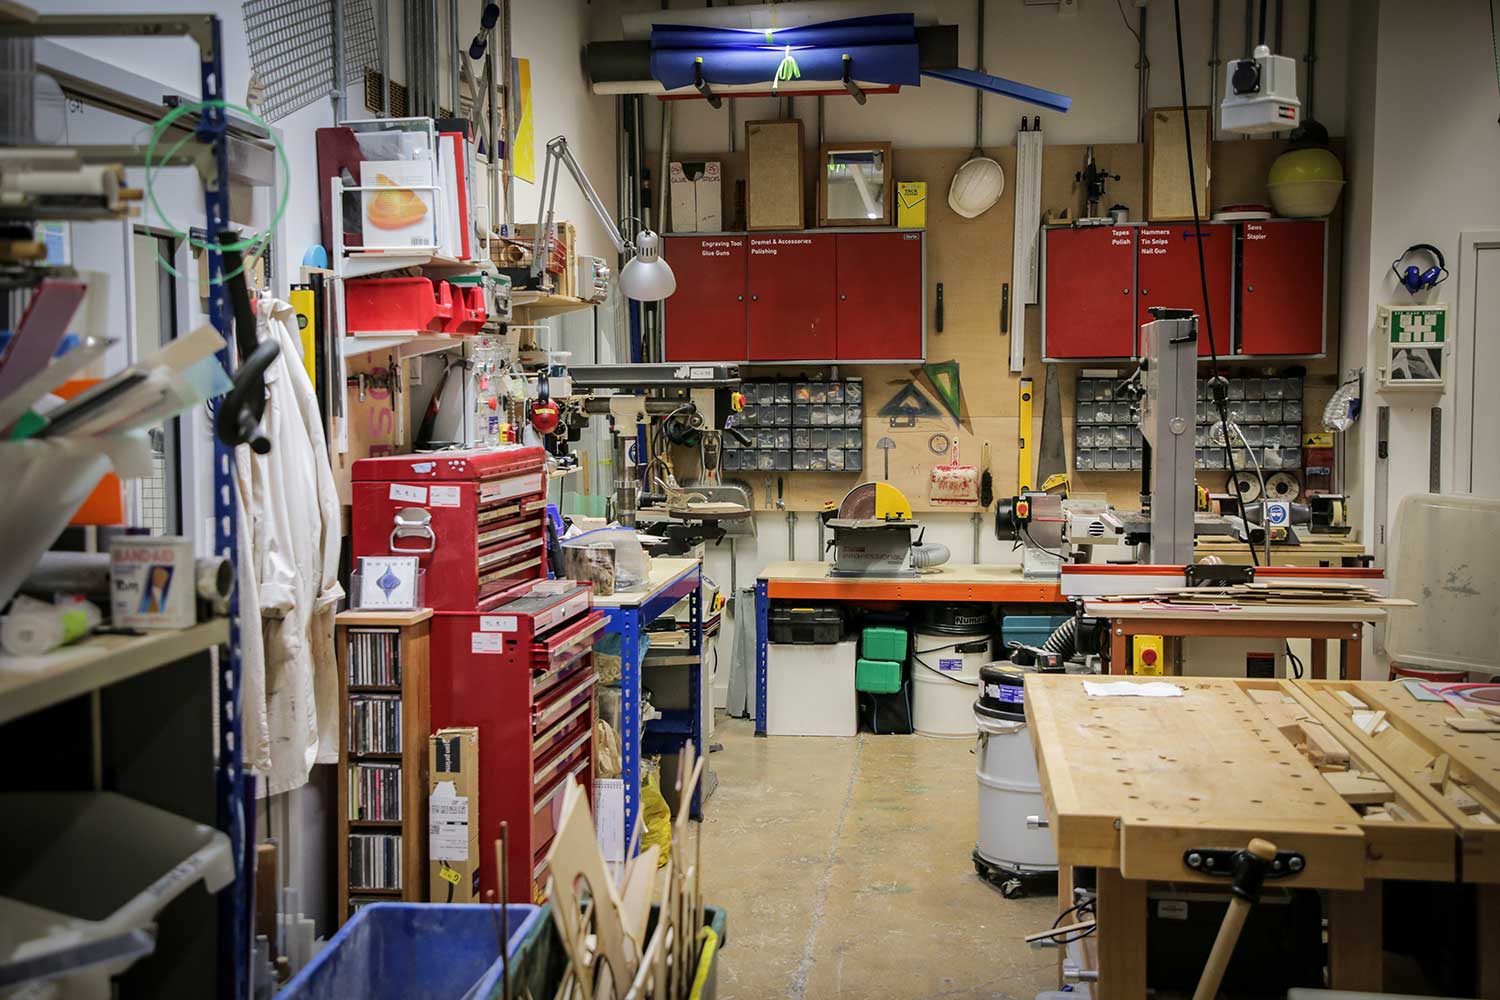 A woodwork workshop full of tools and equipment